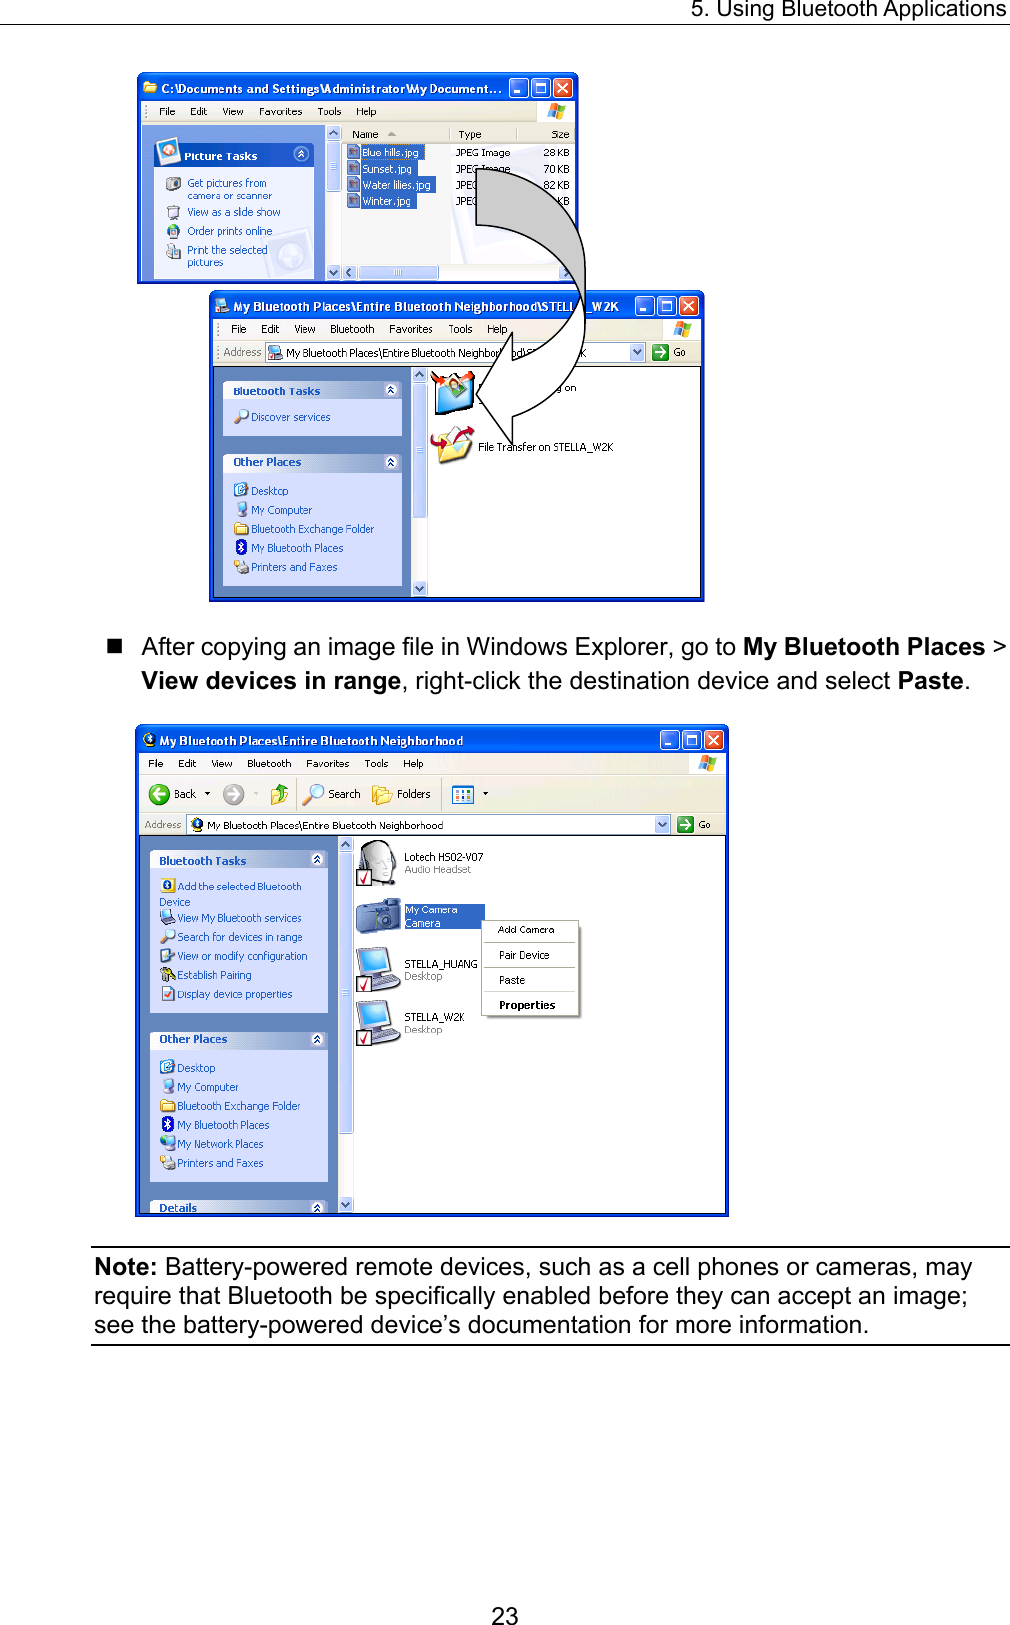 5. Using Bluetooth Applications 23   After copying an image file in Windows Explorer, go to My Bluetooth Places &gt; View devices in range, right-click the destination device and select Paste.  Note: Battery-powered remote devices, such as a cell phones or cameras, may require that Bluetooth be specifically enabled before they can accept an image; see the battery-powered device’s documentation for more information. 